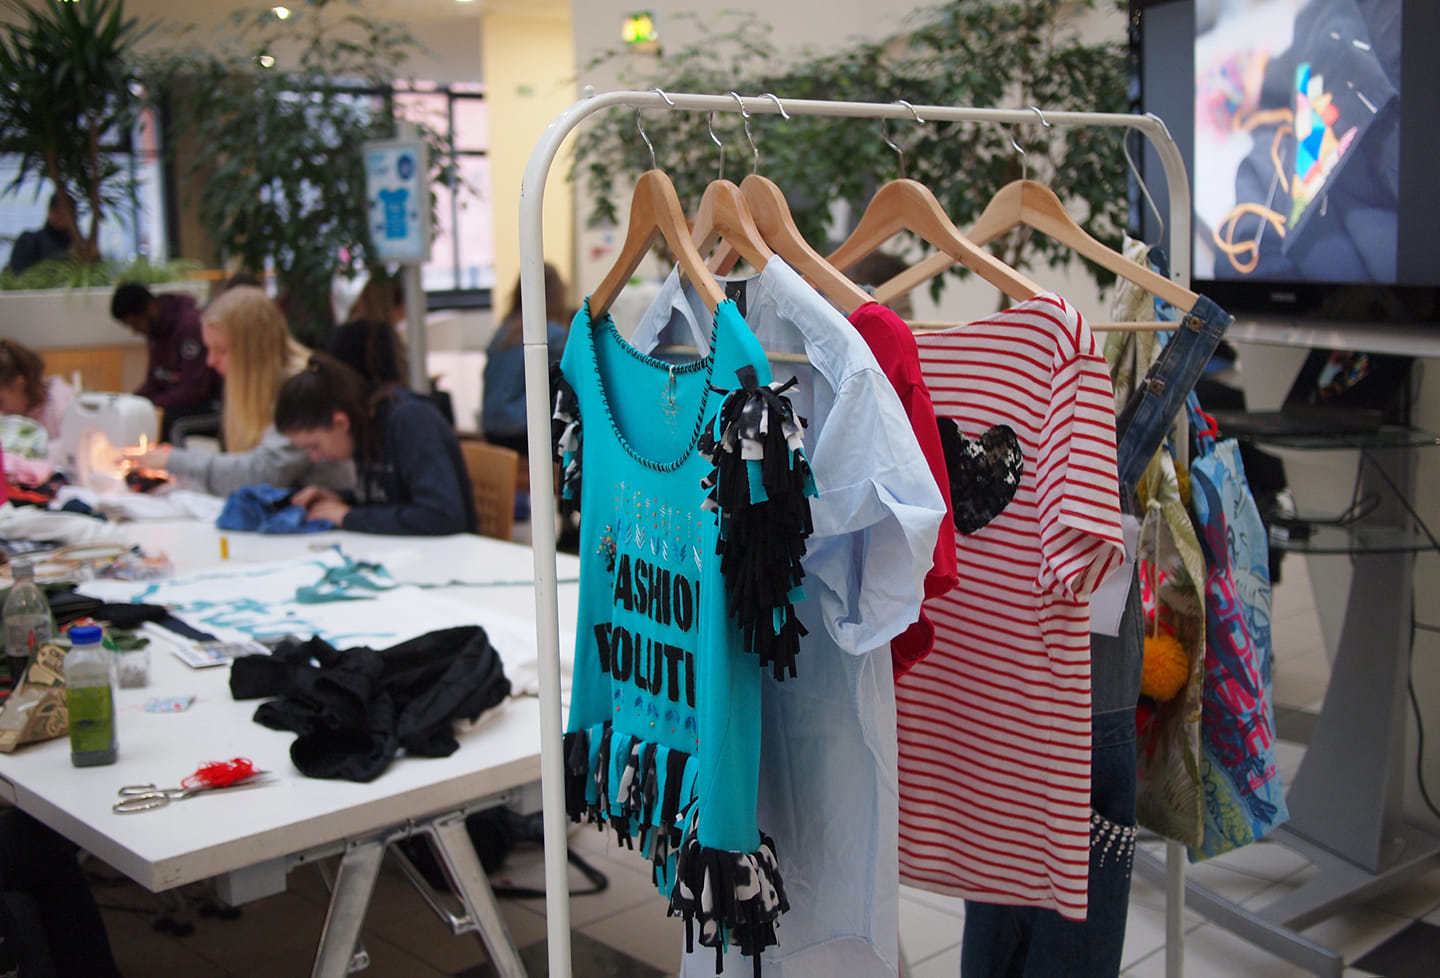 The Chorlton not-for-profit on a sustainable clothing mission since 2011, The Manc